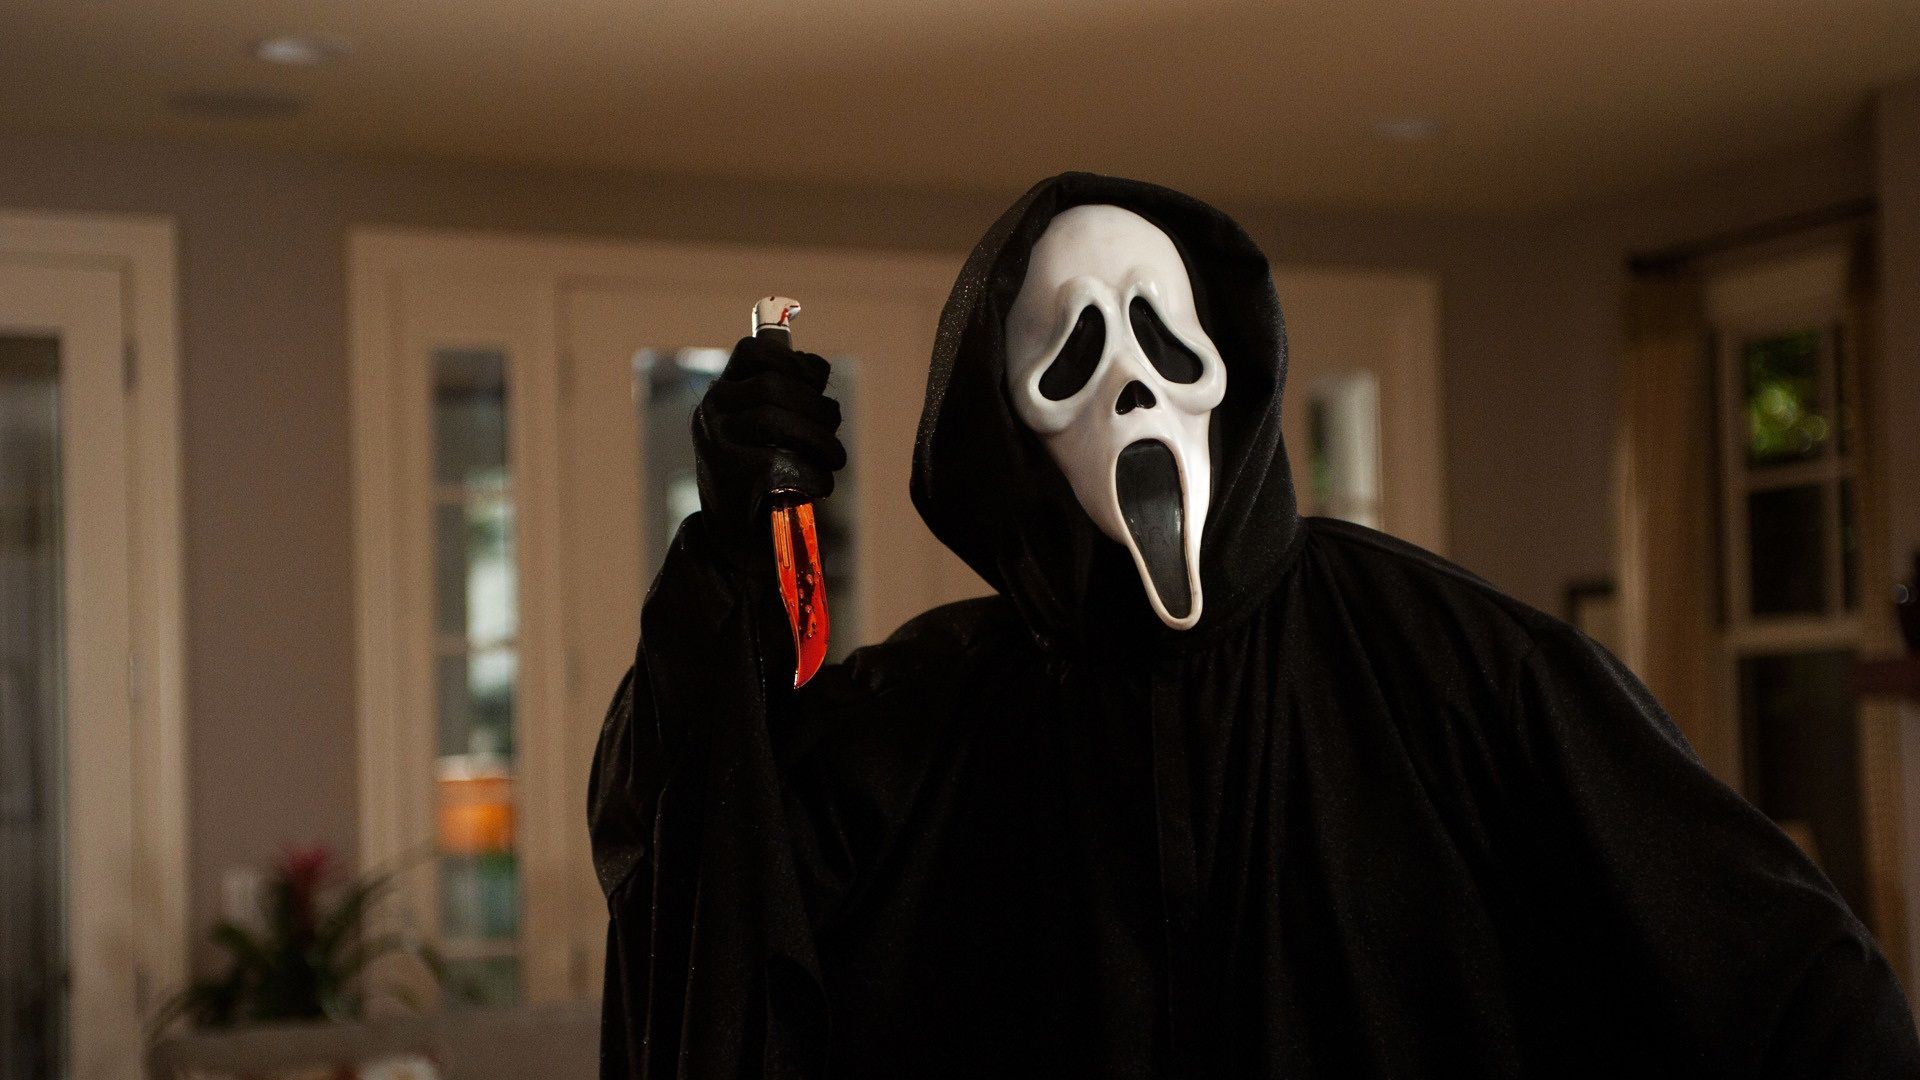 Ghostface 4K wallpaper for your desktop or mobile screen free and easy to download